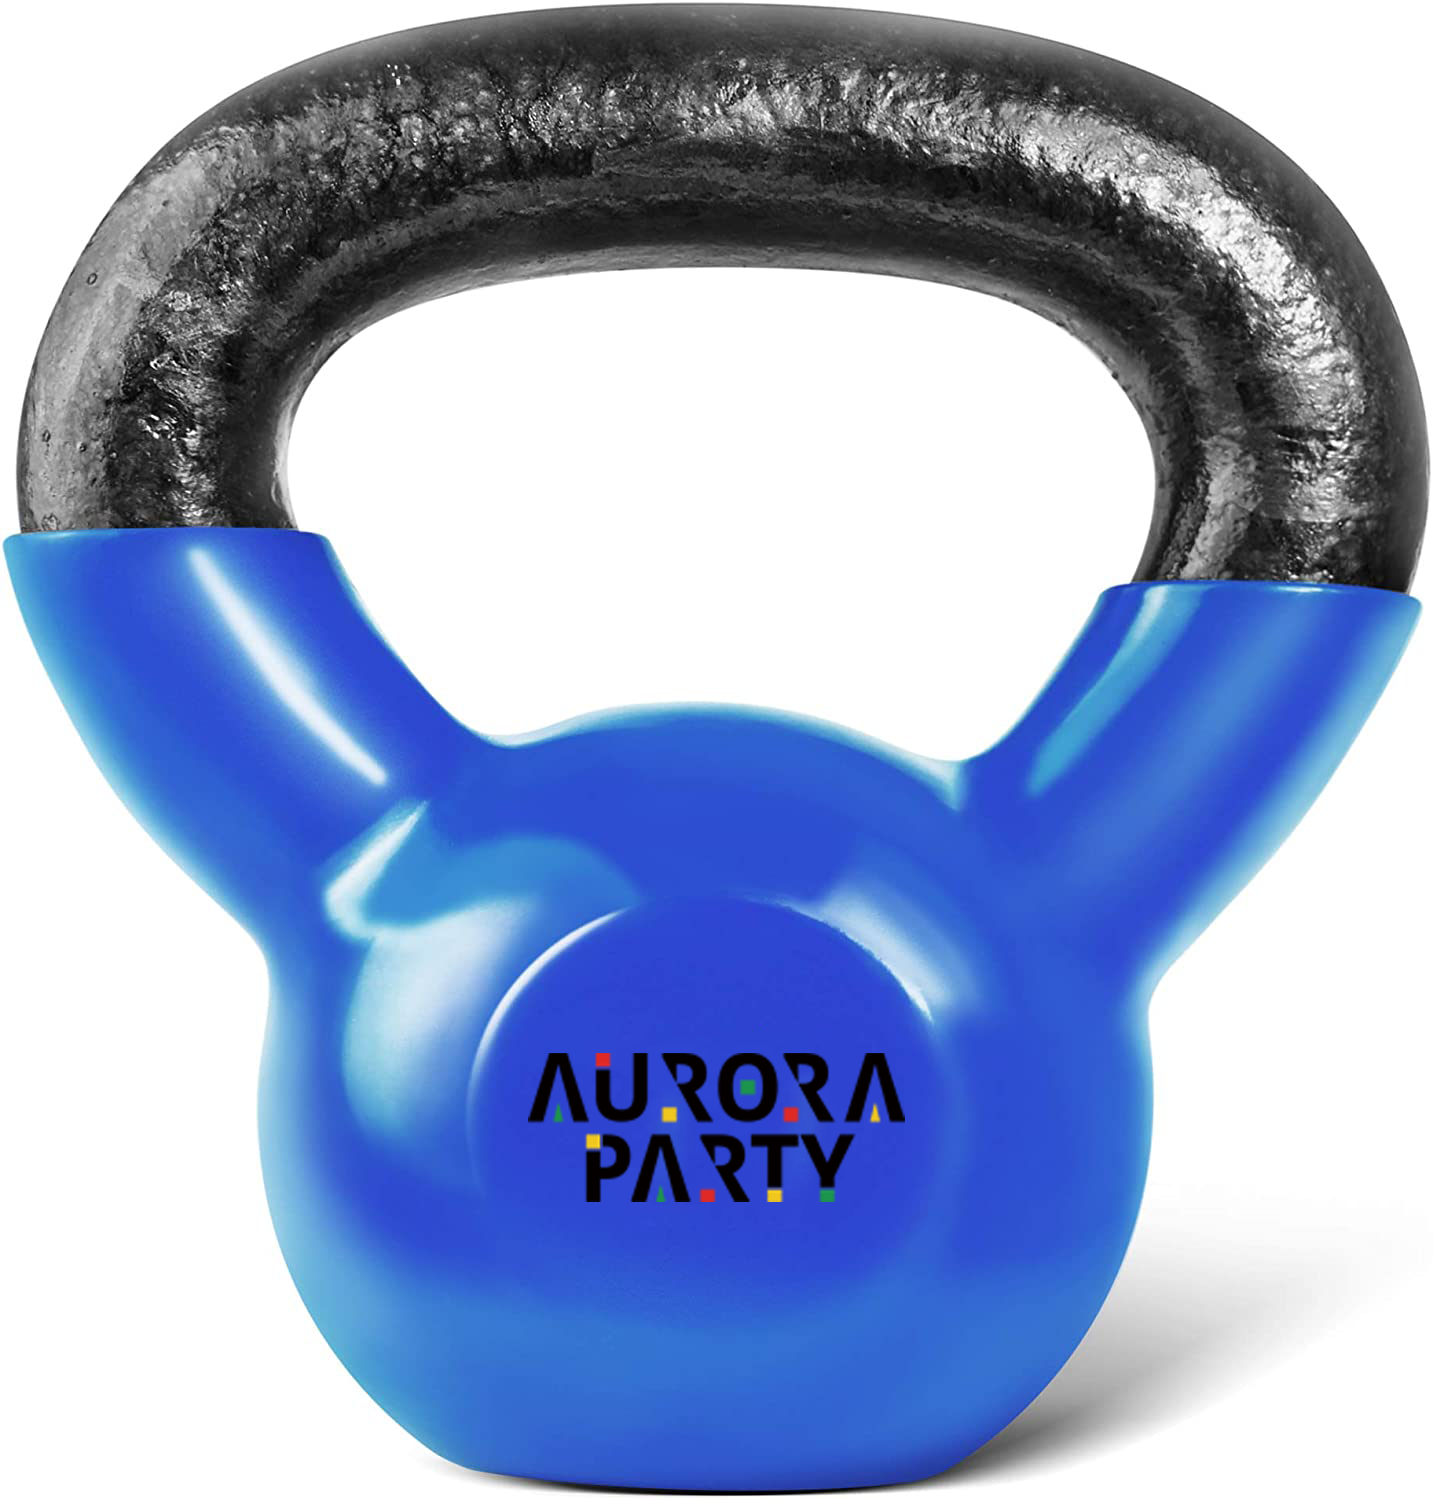  AURORAPARTY All Vinyl Coated Kettlebell Weights, Weight Available: 5, 10, 15, 20, 25, 30, 35, 40, 45, 50 Lb - Strength Training Kettlebells for Weightlifting, Conditioning, Strength & Core Training